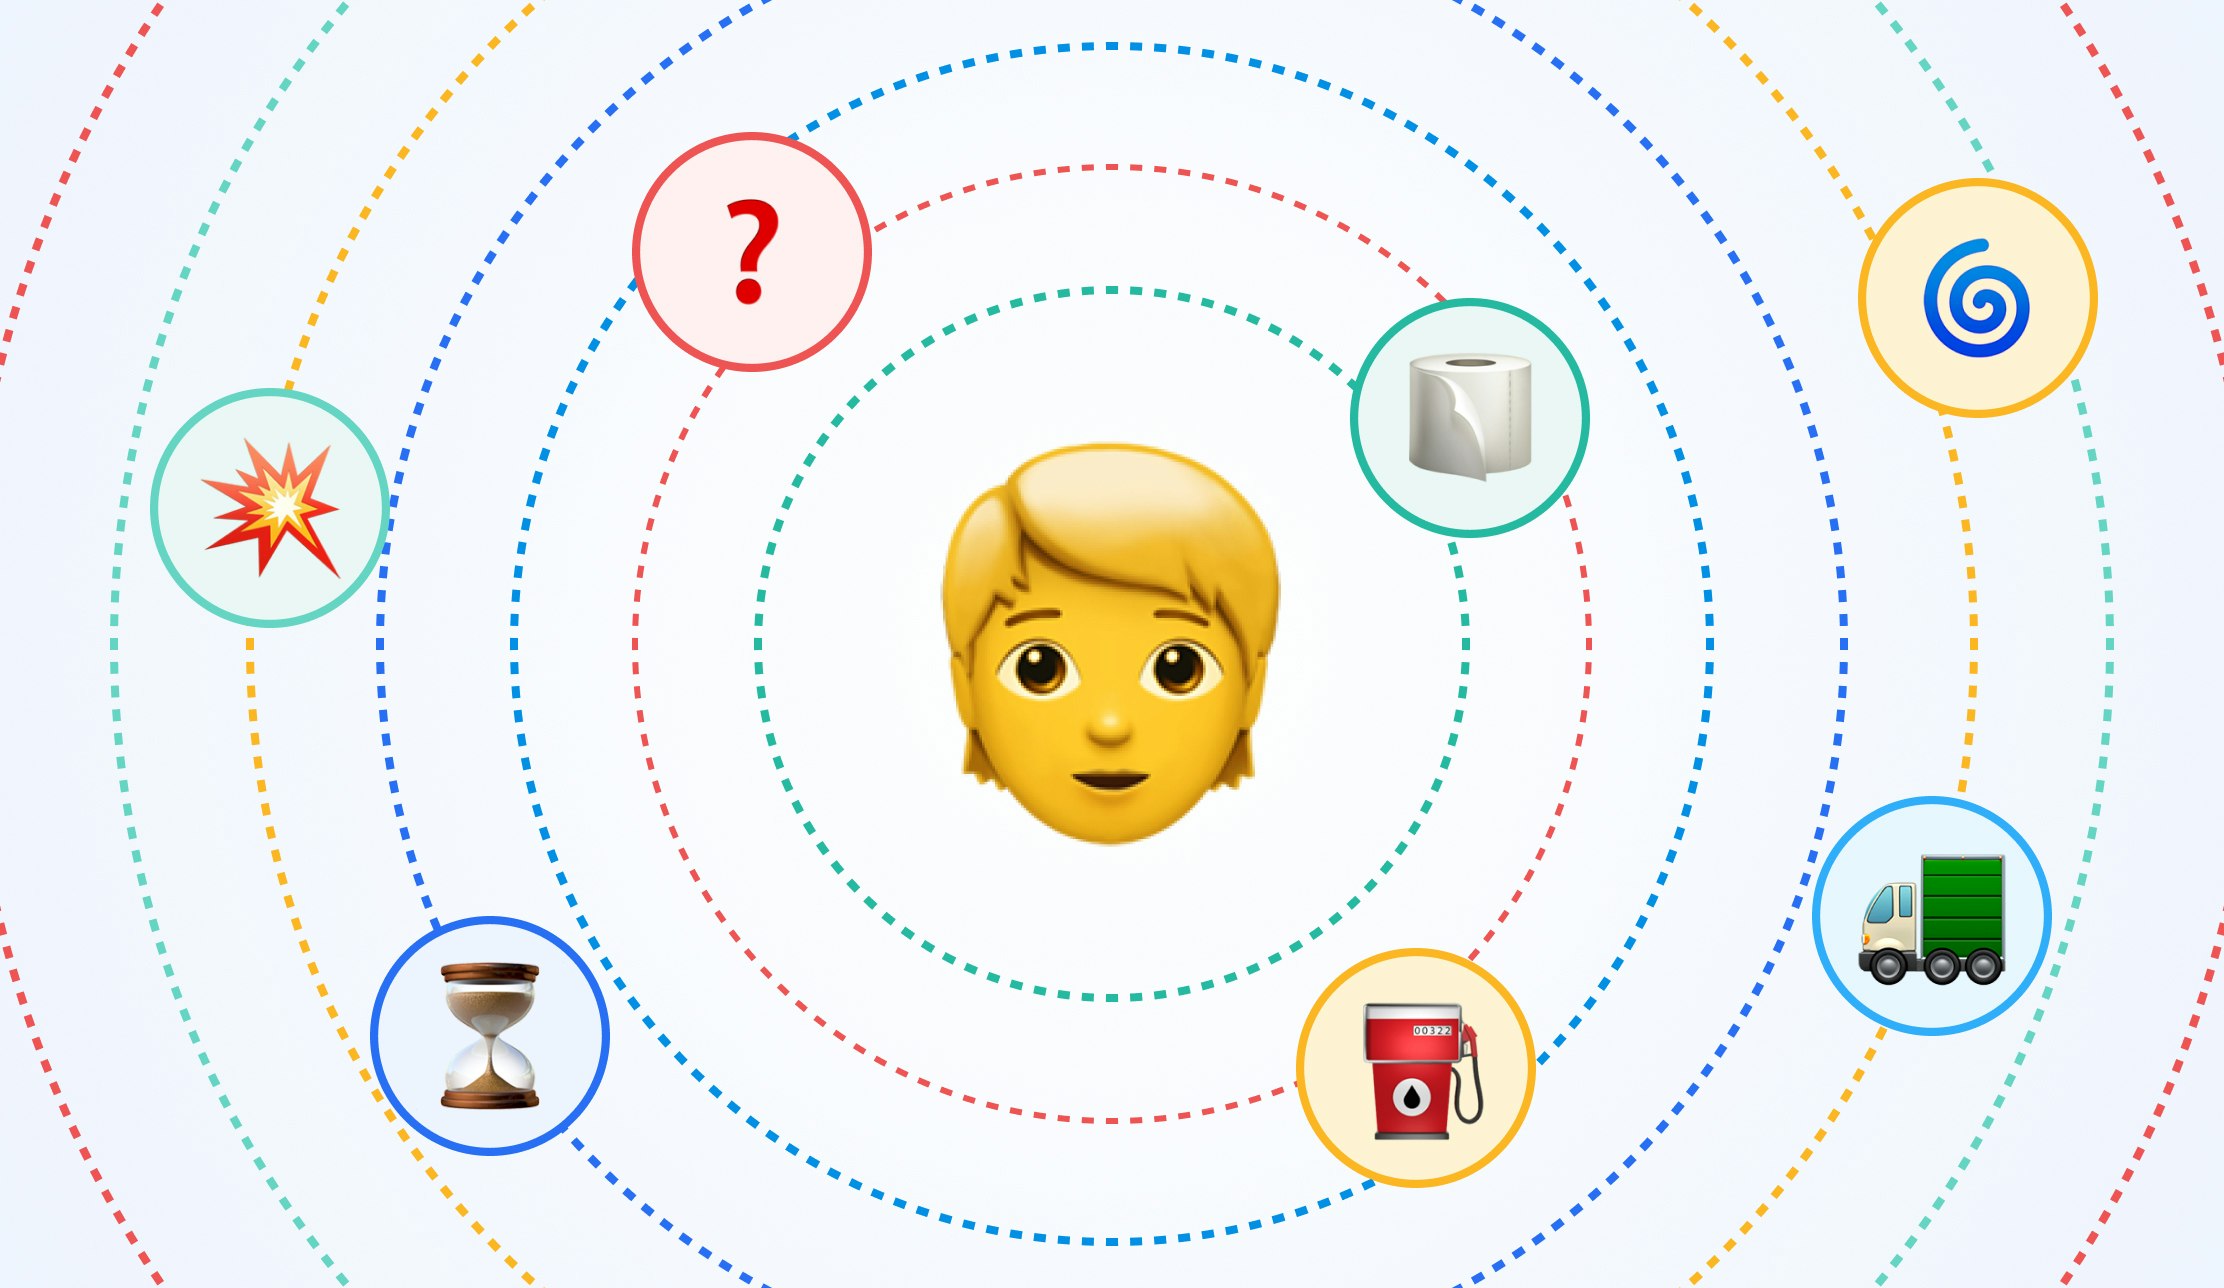 7 problems faced by couriers: Emoji girl face with circles and icons around it